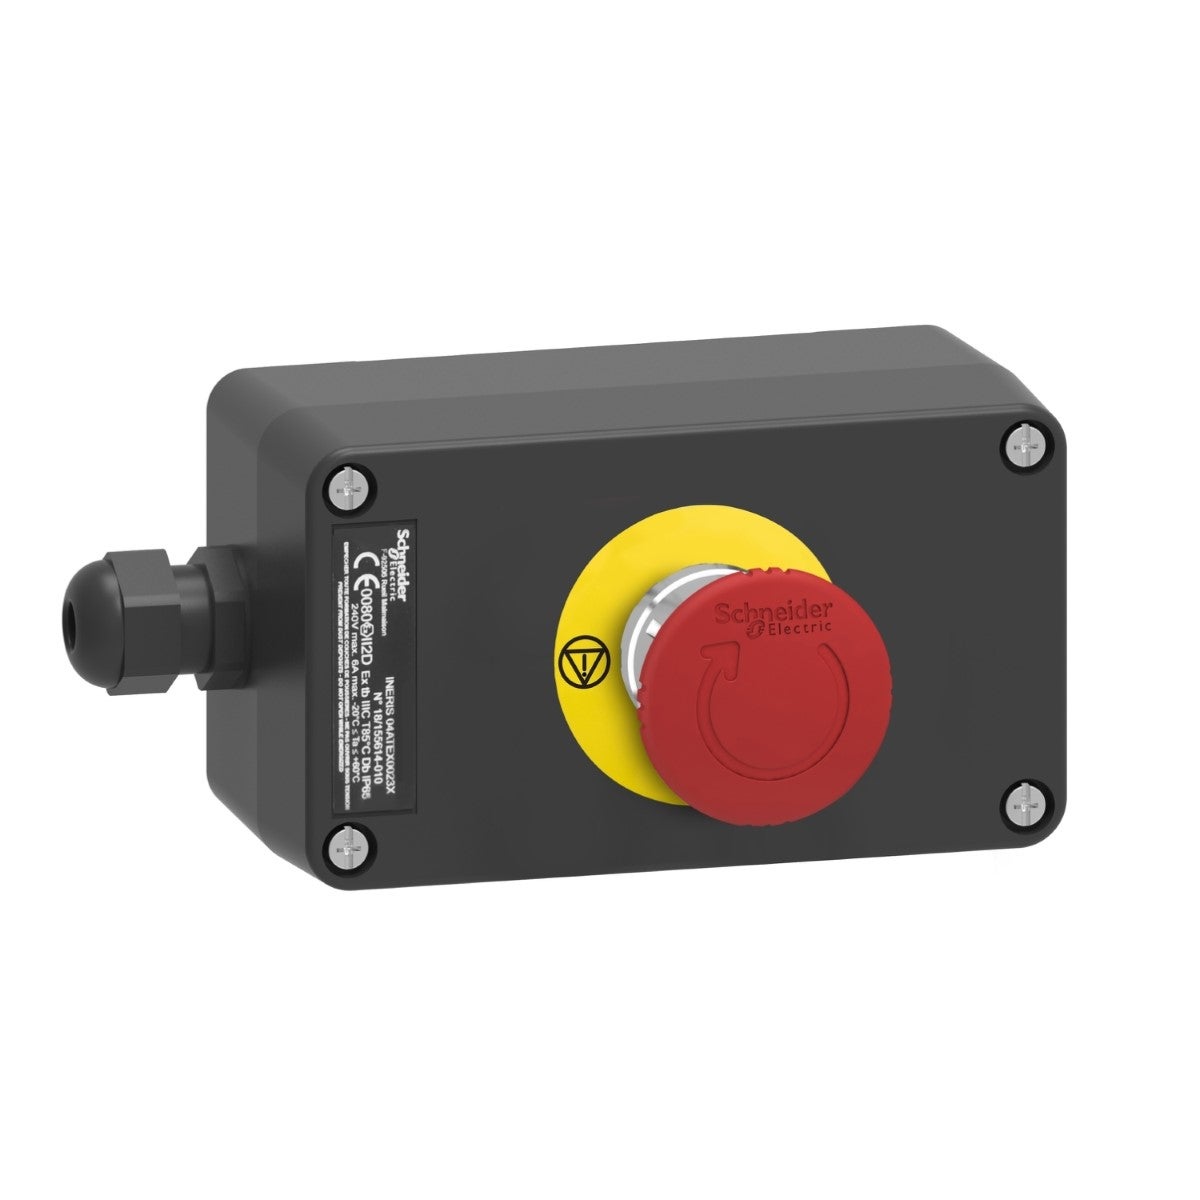 Control station, Harmony XAW, metal with fiberglass, emergency stop function, turn to release, 1 red mushroom 40mm, 1NC + 1NC, ATEX